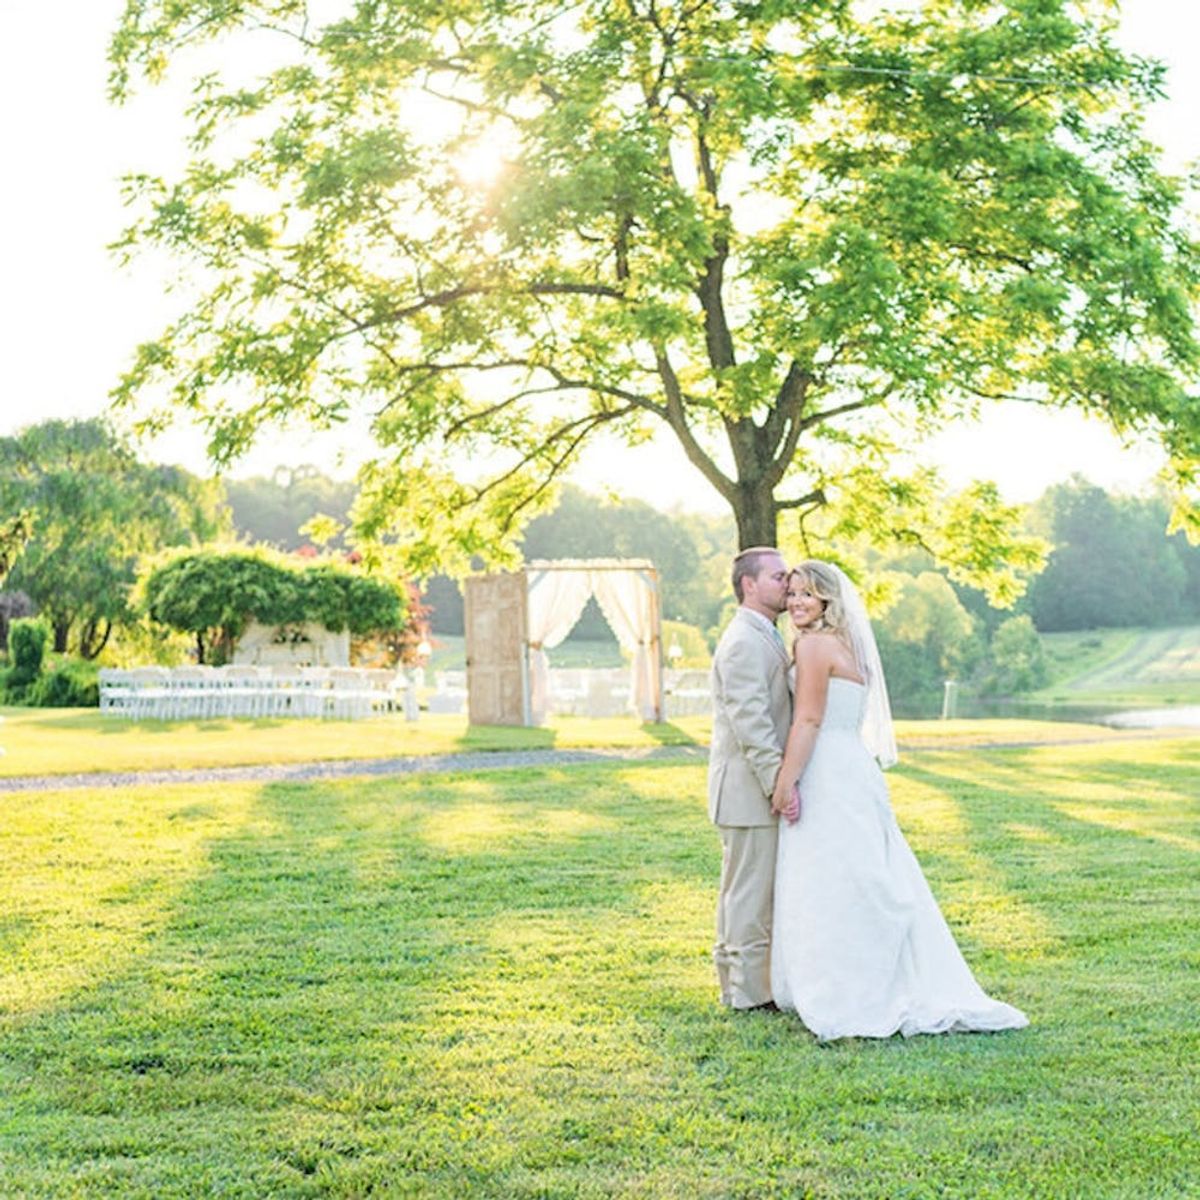 This Classic Country Wedding Is All Kinds of DIY Cute